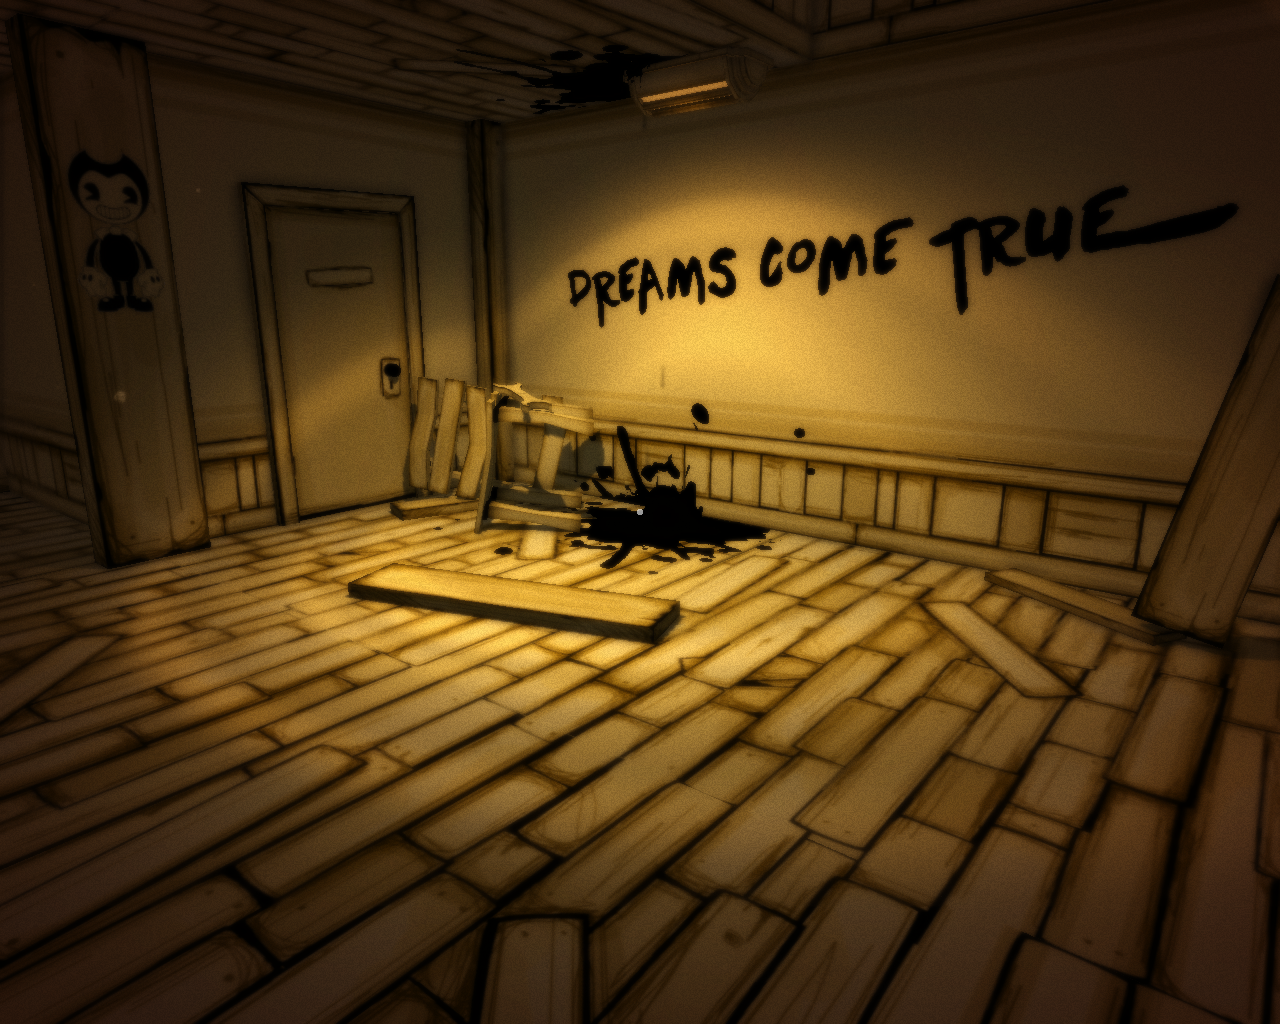 Bendy And The Ink Machine Chapter One Moving Pictures